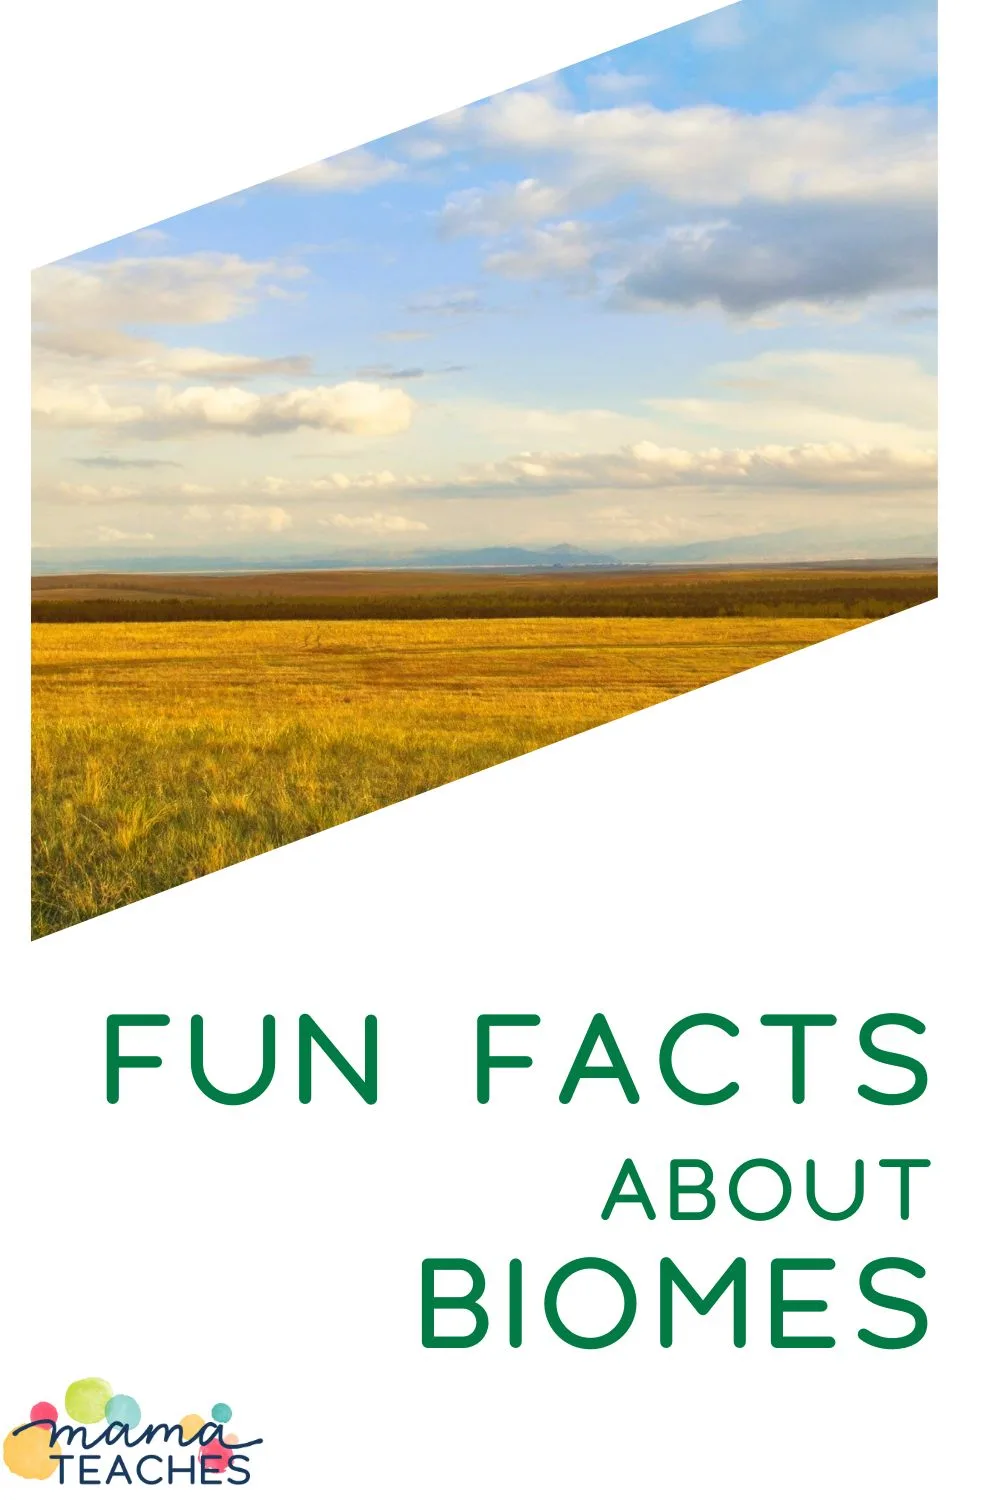 Fun Facts About Biomes